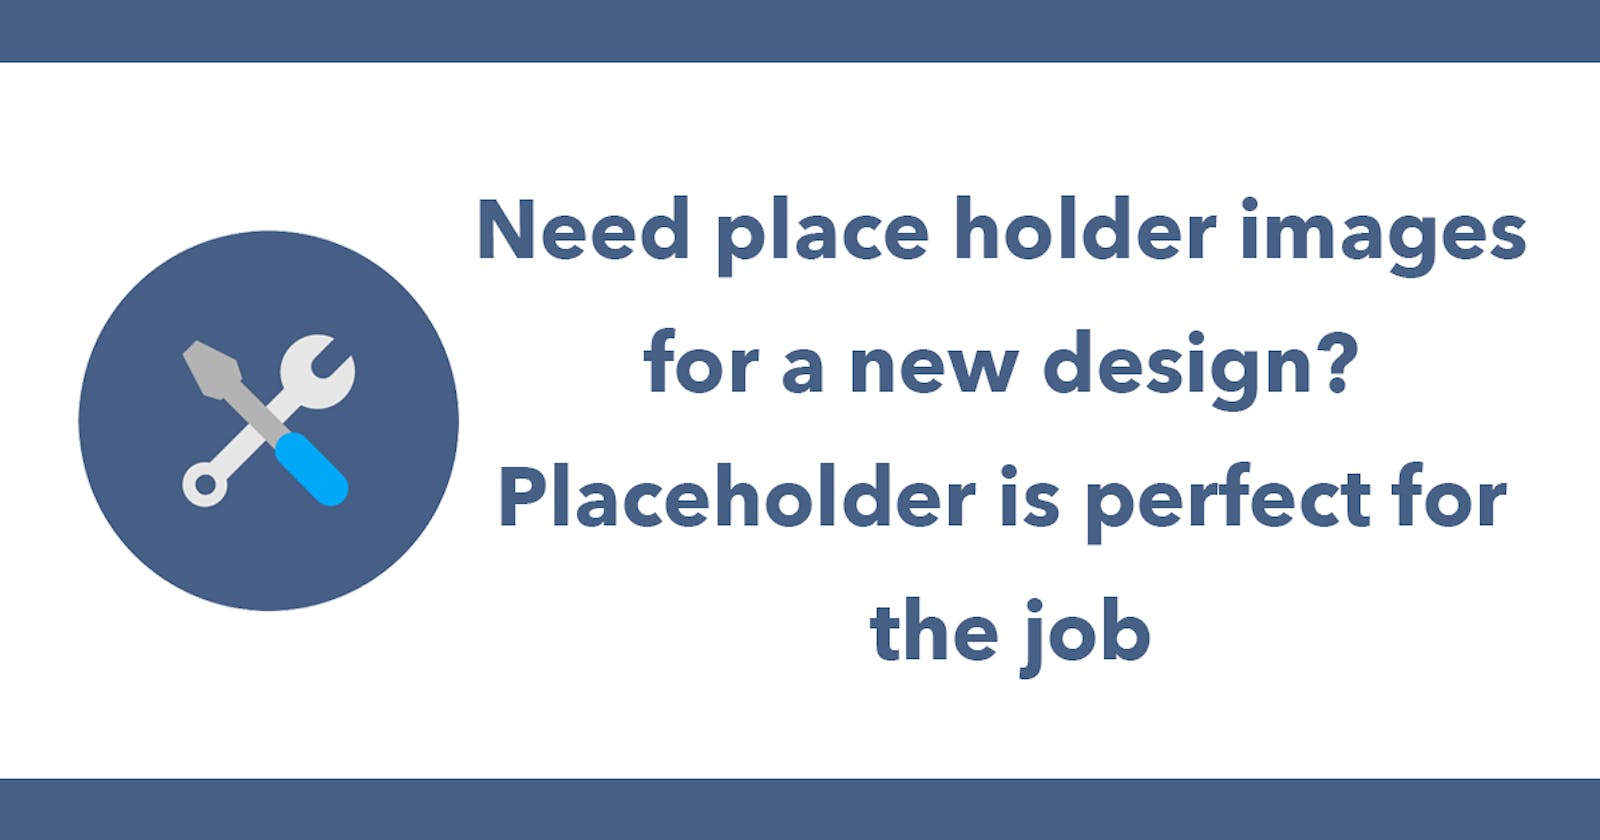 Need place holder images for a new design? Placeholder is perfect for the job